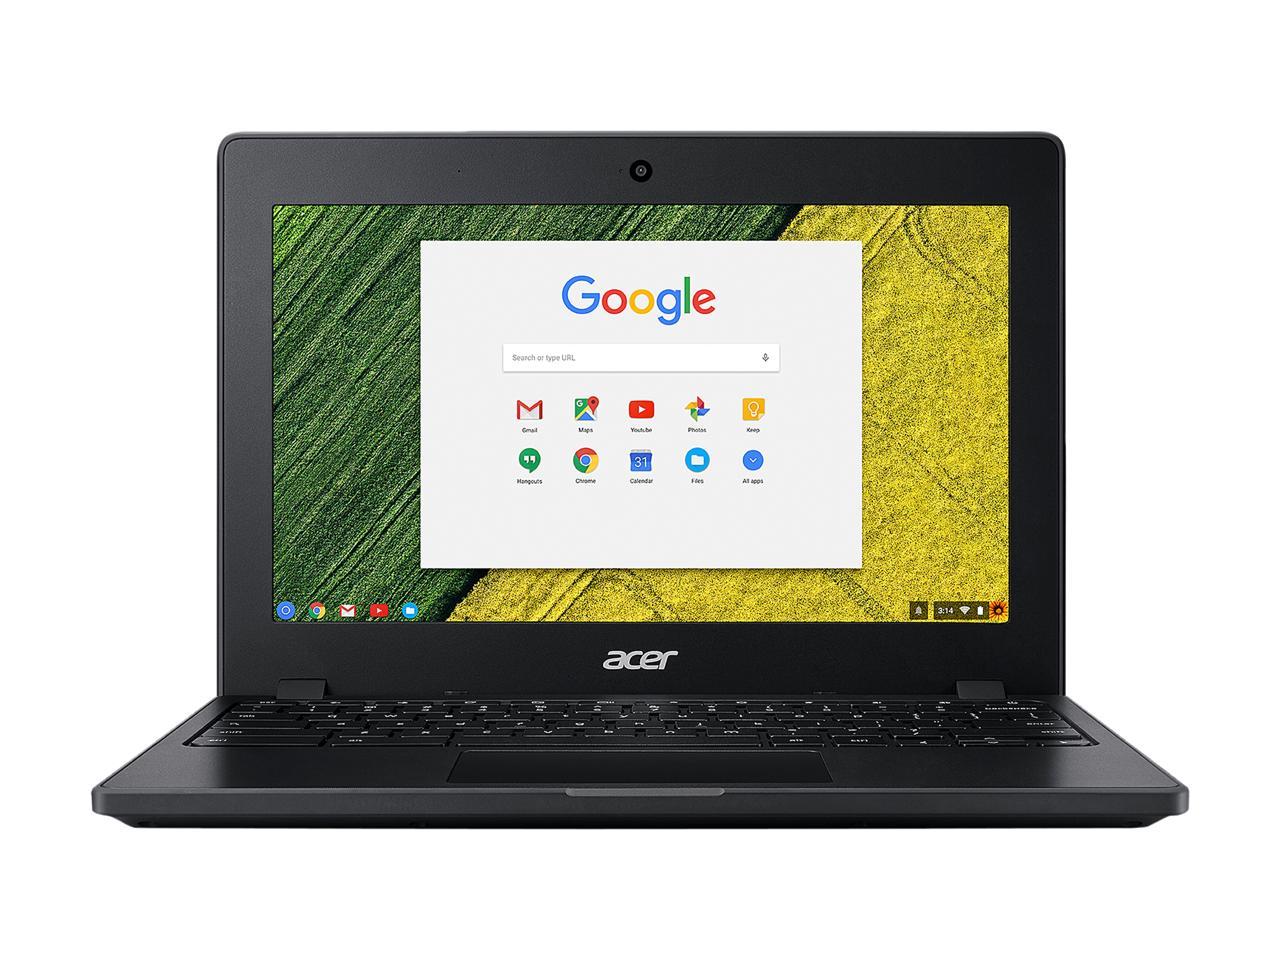 Acer C771T-C1WS 11.6" Touchscreen LCD Chromebook - Intel Celeron 3855U Dual-core (2 Core) 1.60 GHz - 4 GB LPDDR3 - 32 GB Flash Memory - Chrome OS - 1366 x 768 - In-plane Switching (IPS) Technology